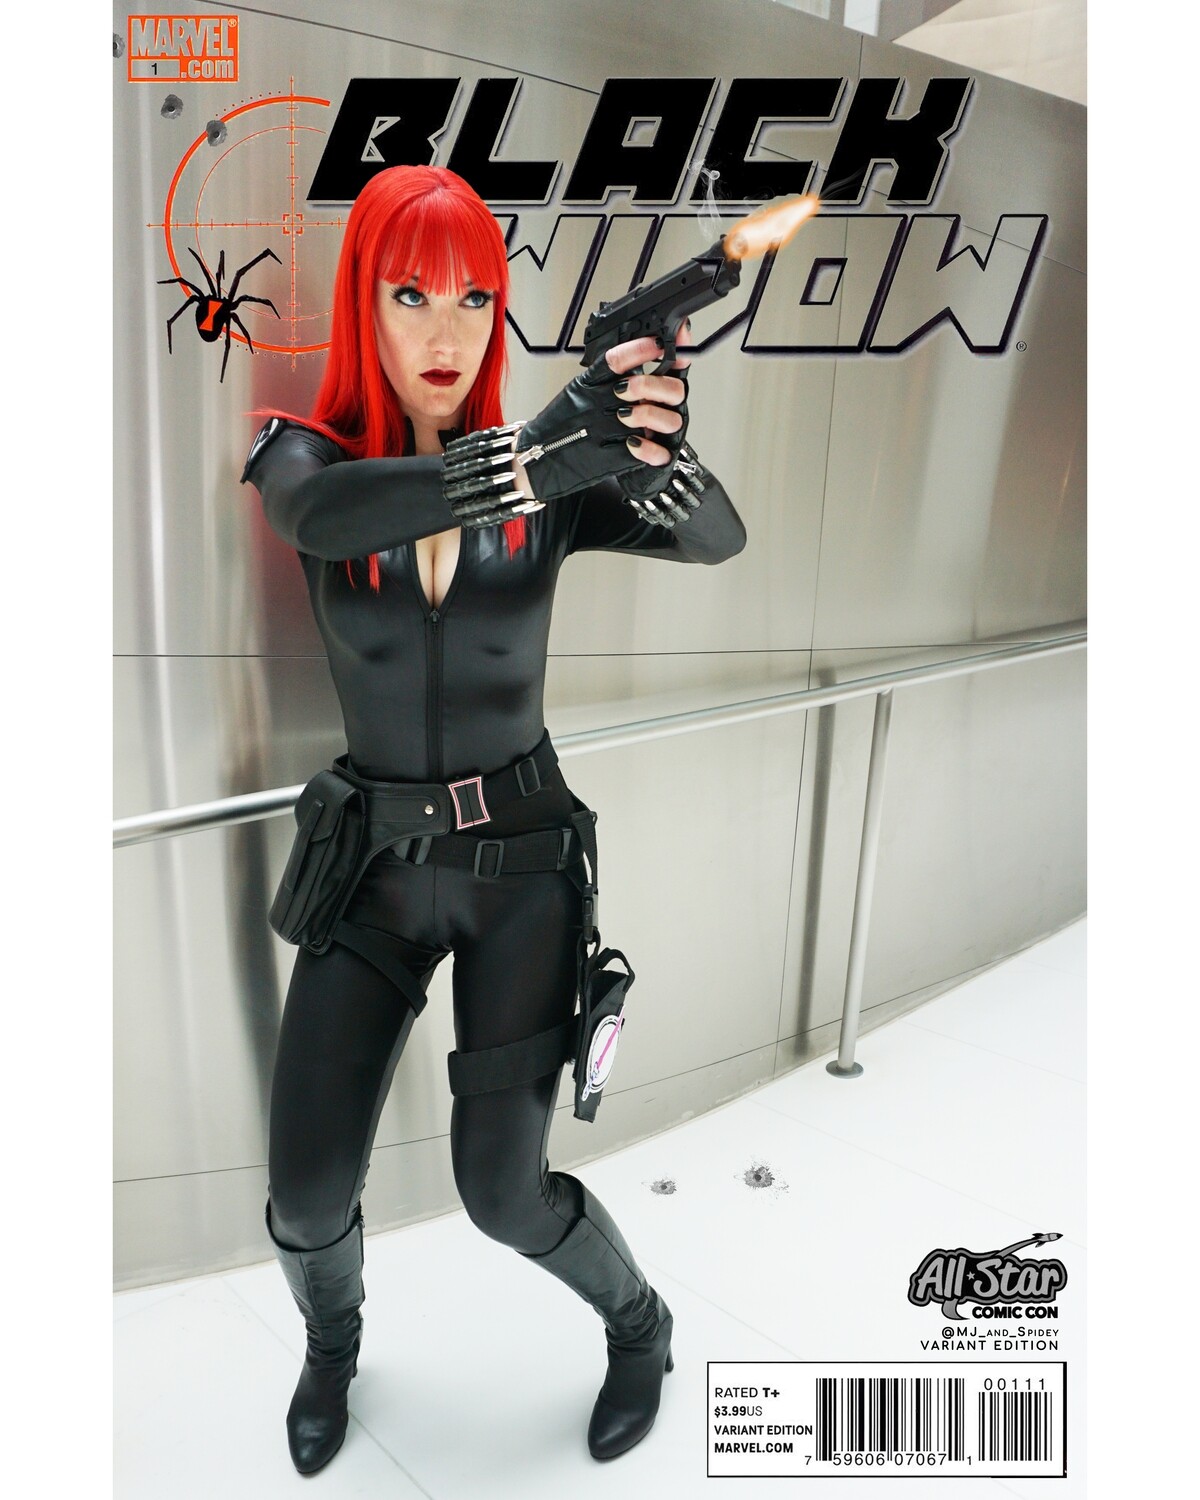 Marvel - Avengers - Black Widow 8B - All Star Variant - Digital Cosplay Image (@MJ_and_Spidey, MJ and Spidey, Comics)